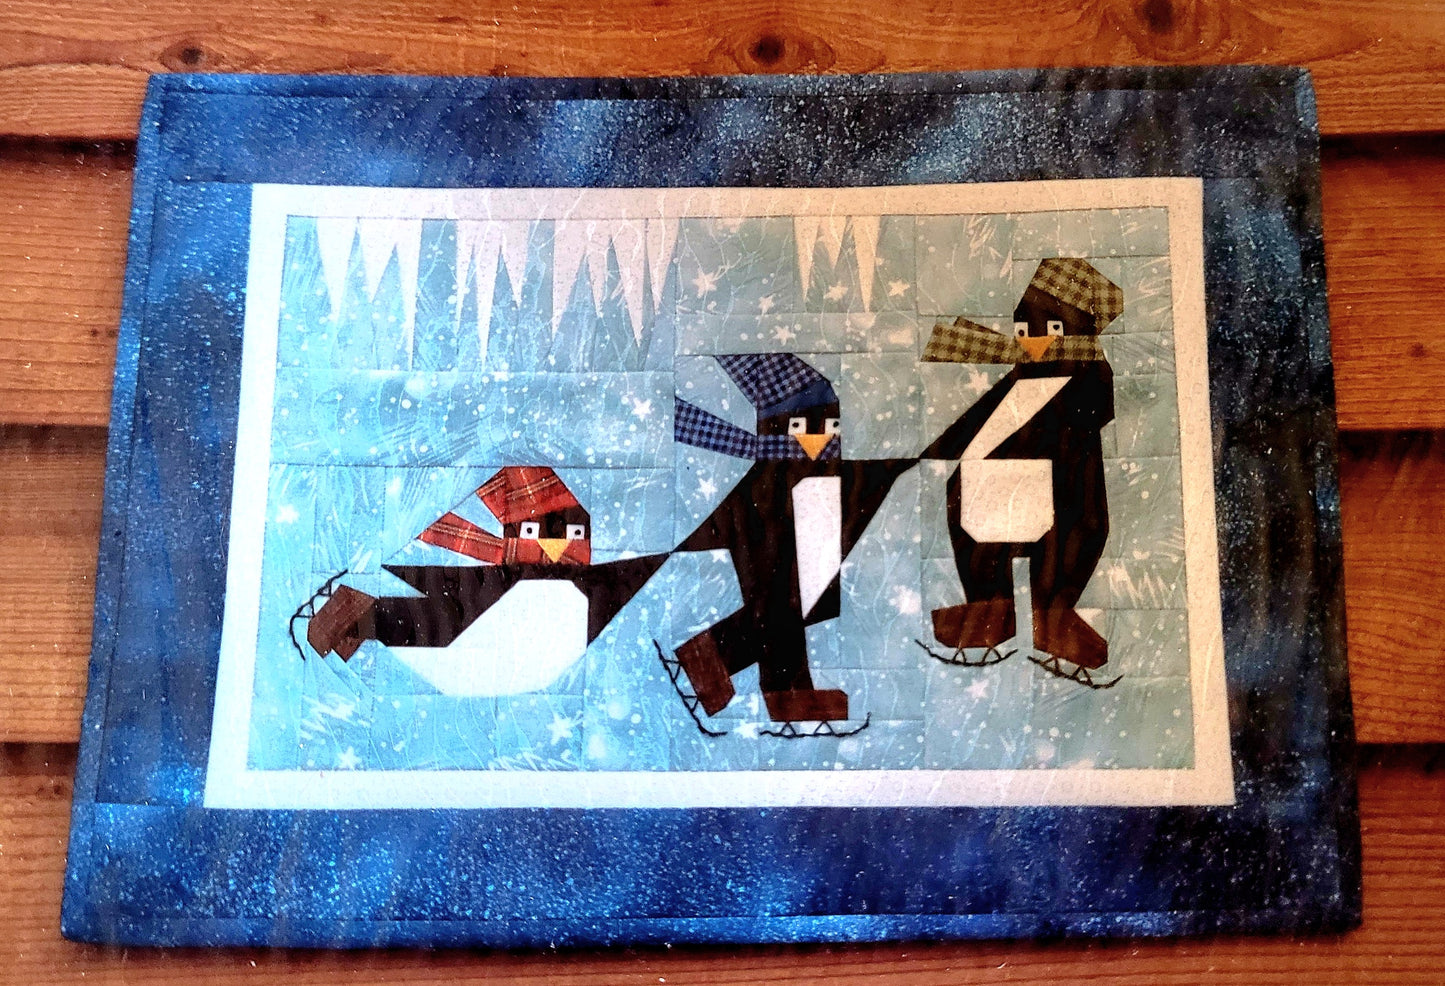 MH Designs "Crack the Whip" 3 Ice Skating Penquins Quilt Pattern (14.25"x19.5")